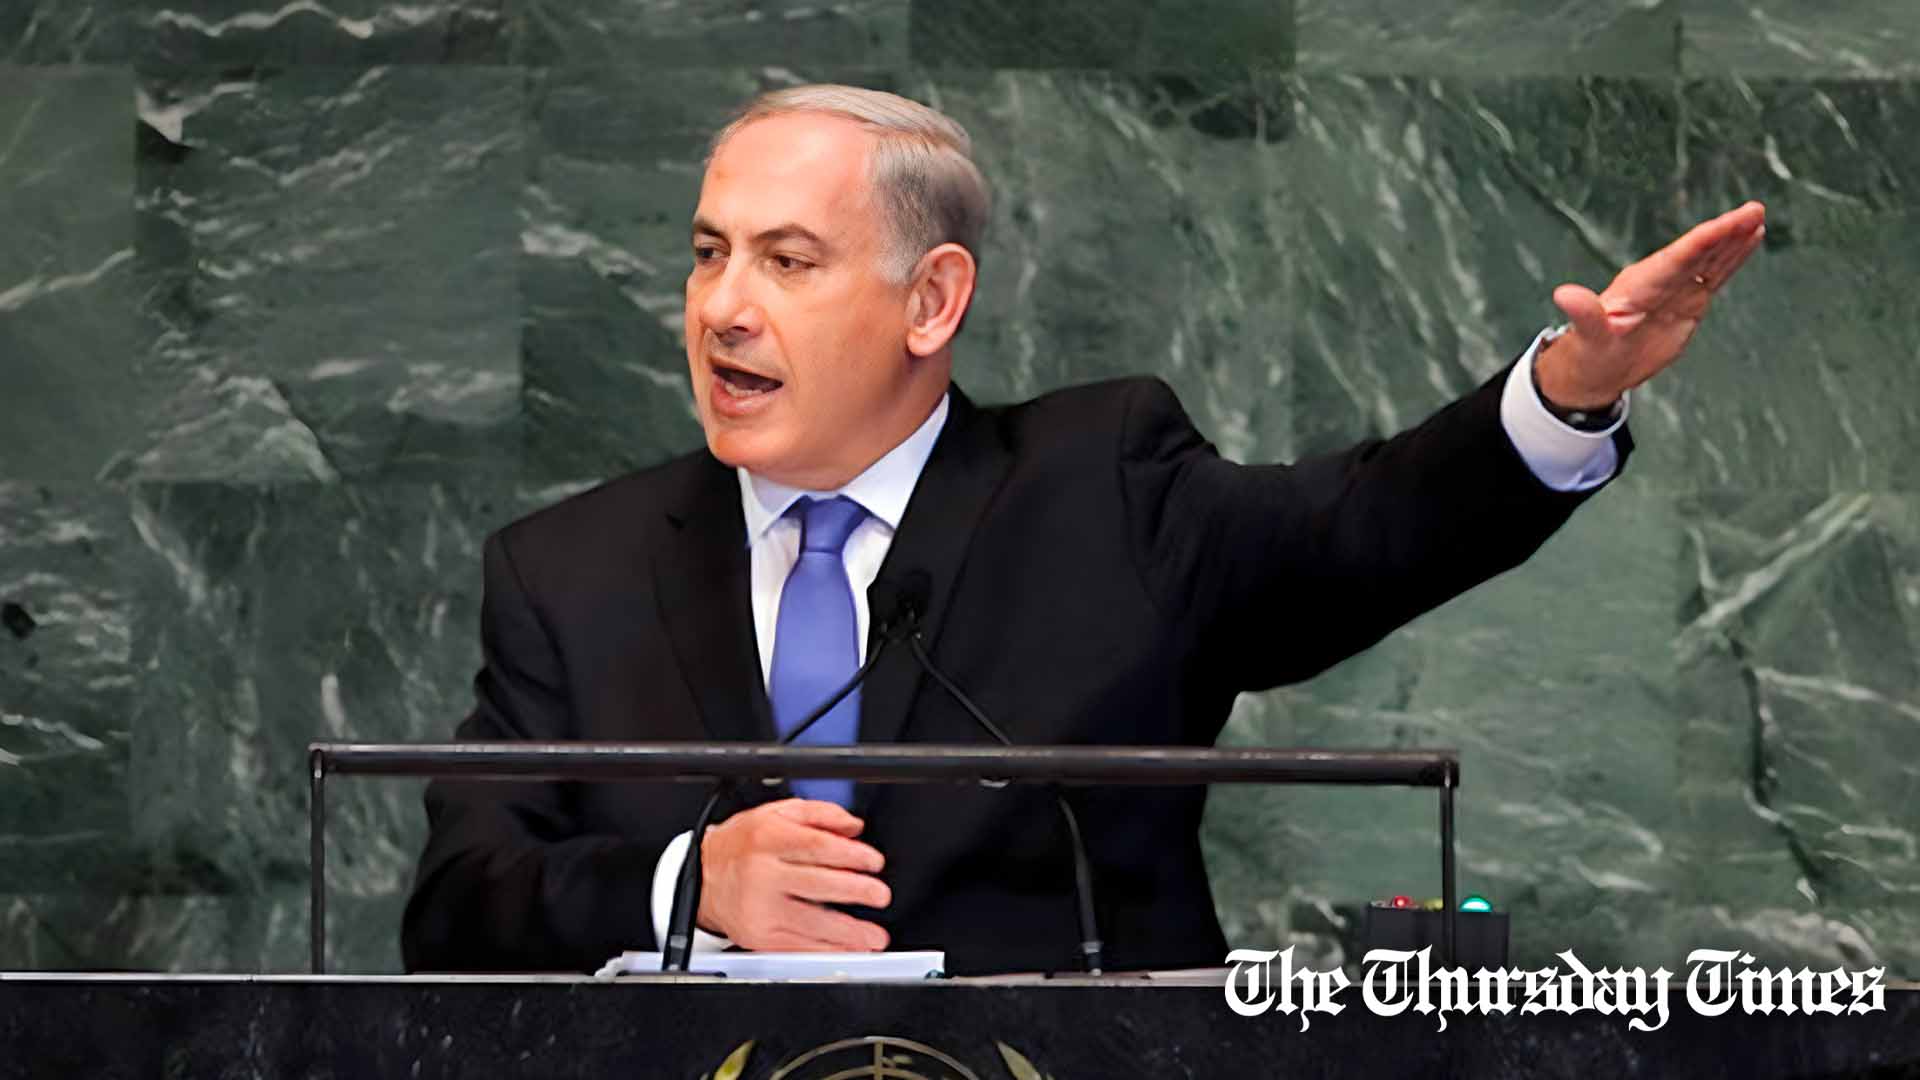 A file photo is shown of Israeli prime minister Benjamin Netanyahu addressing the United Nations in 2012. — FILE/THE THURSDAY TIMES